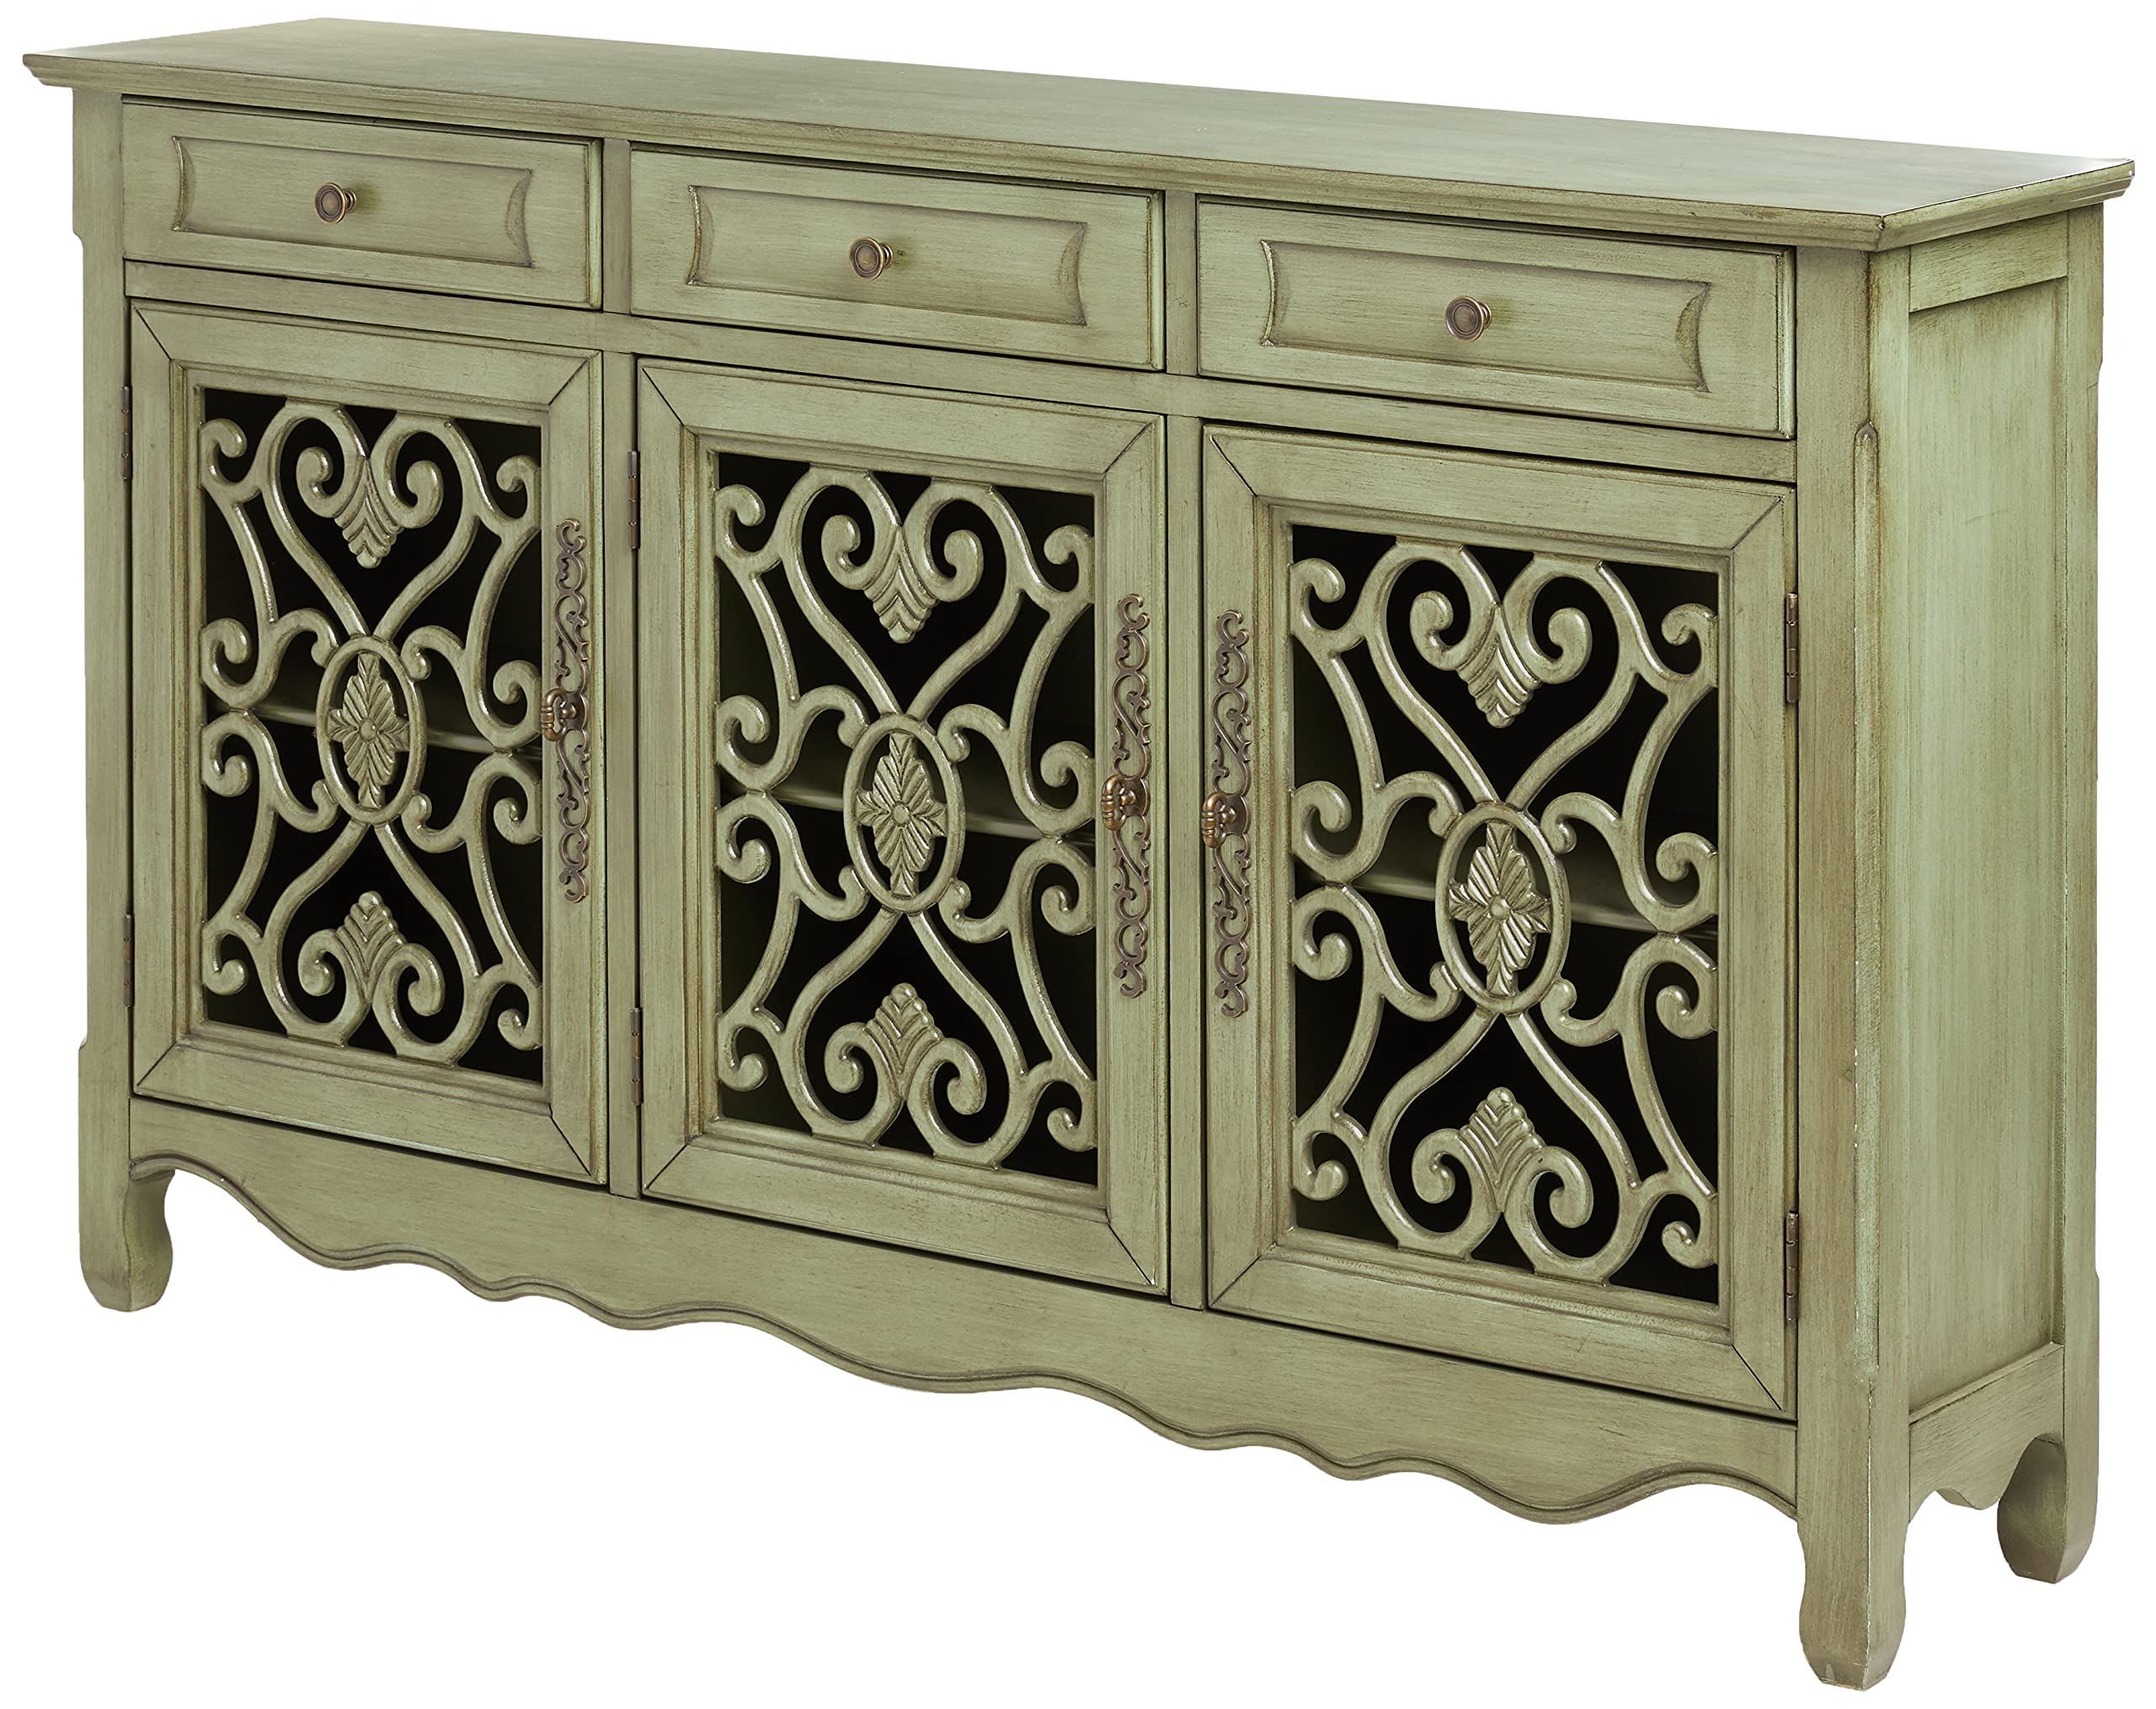 Most Popular 3 Door Accent Cabinet Sideboards With Amazon: Coaster Home Furnishings Madeline 3 Door Accent Cabinet Antique  Green : Home & Kitchen (View 10 of 10)